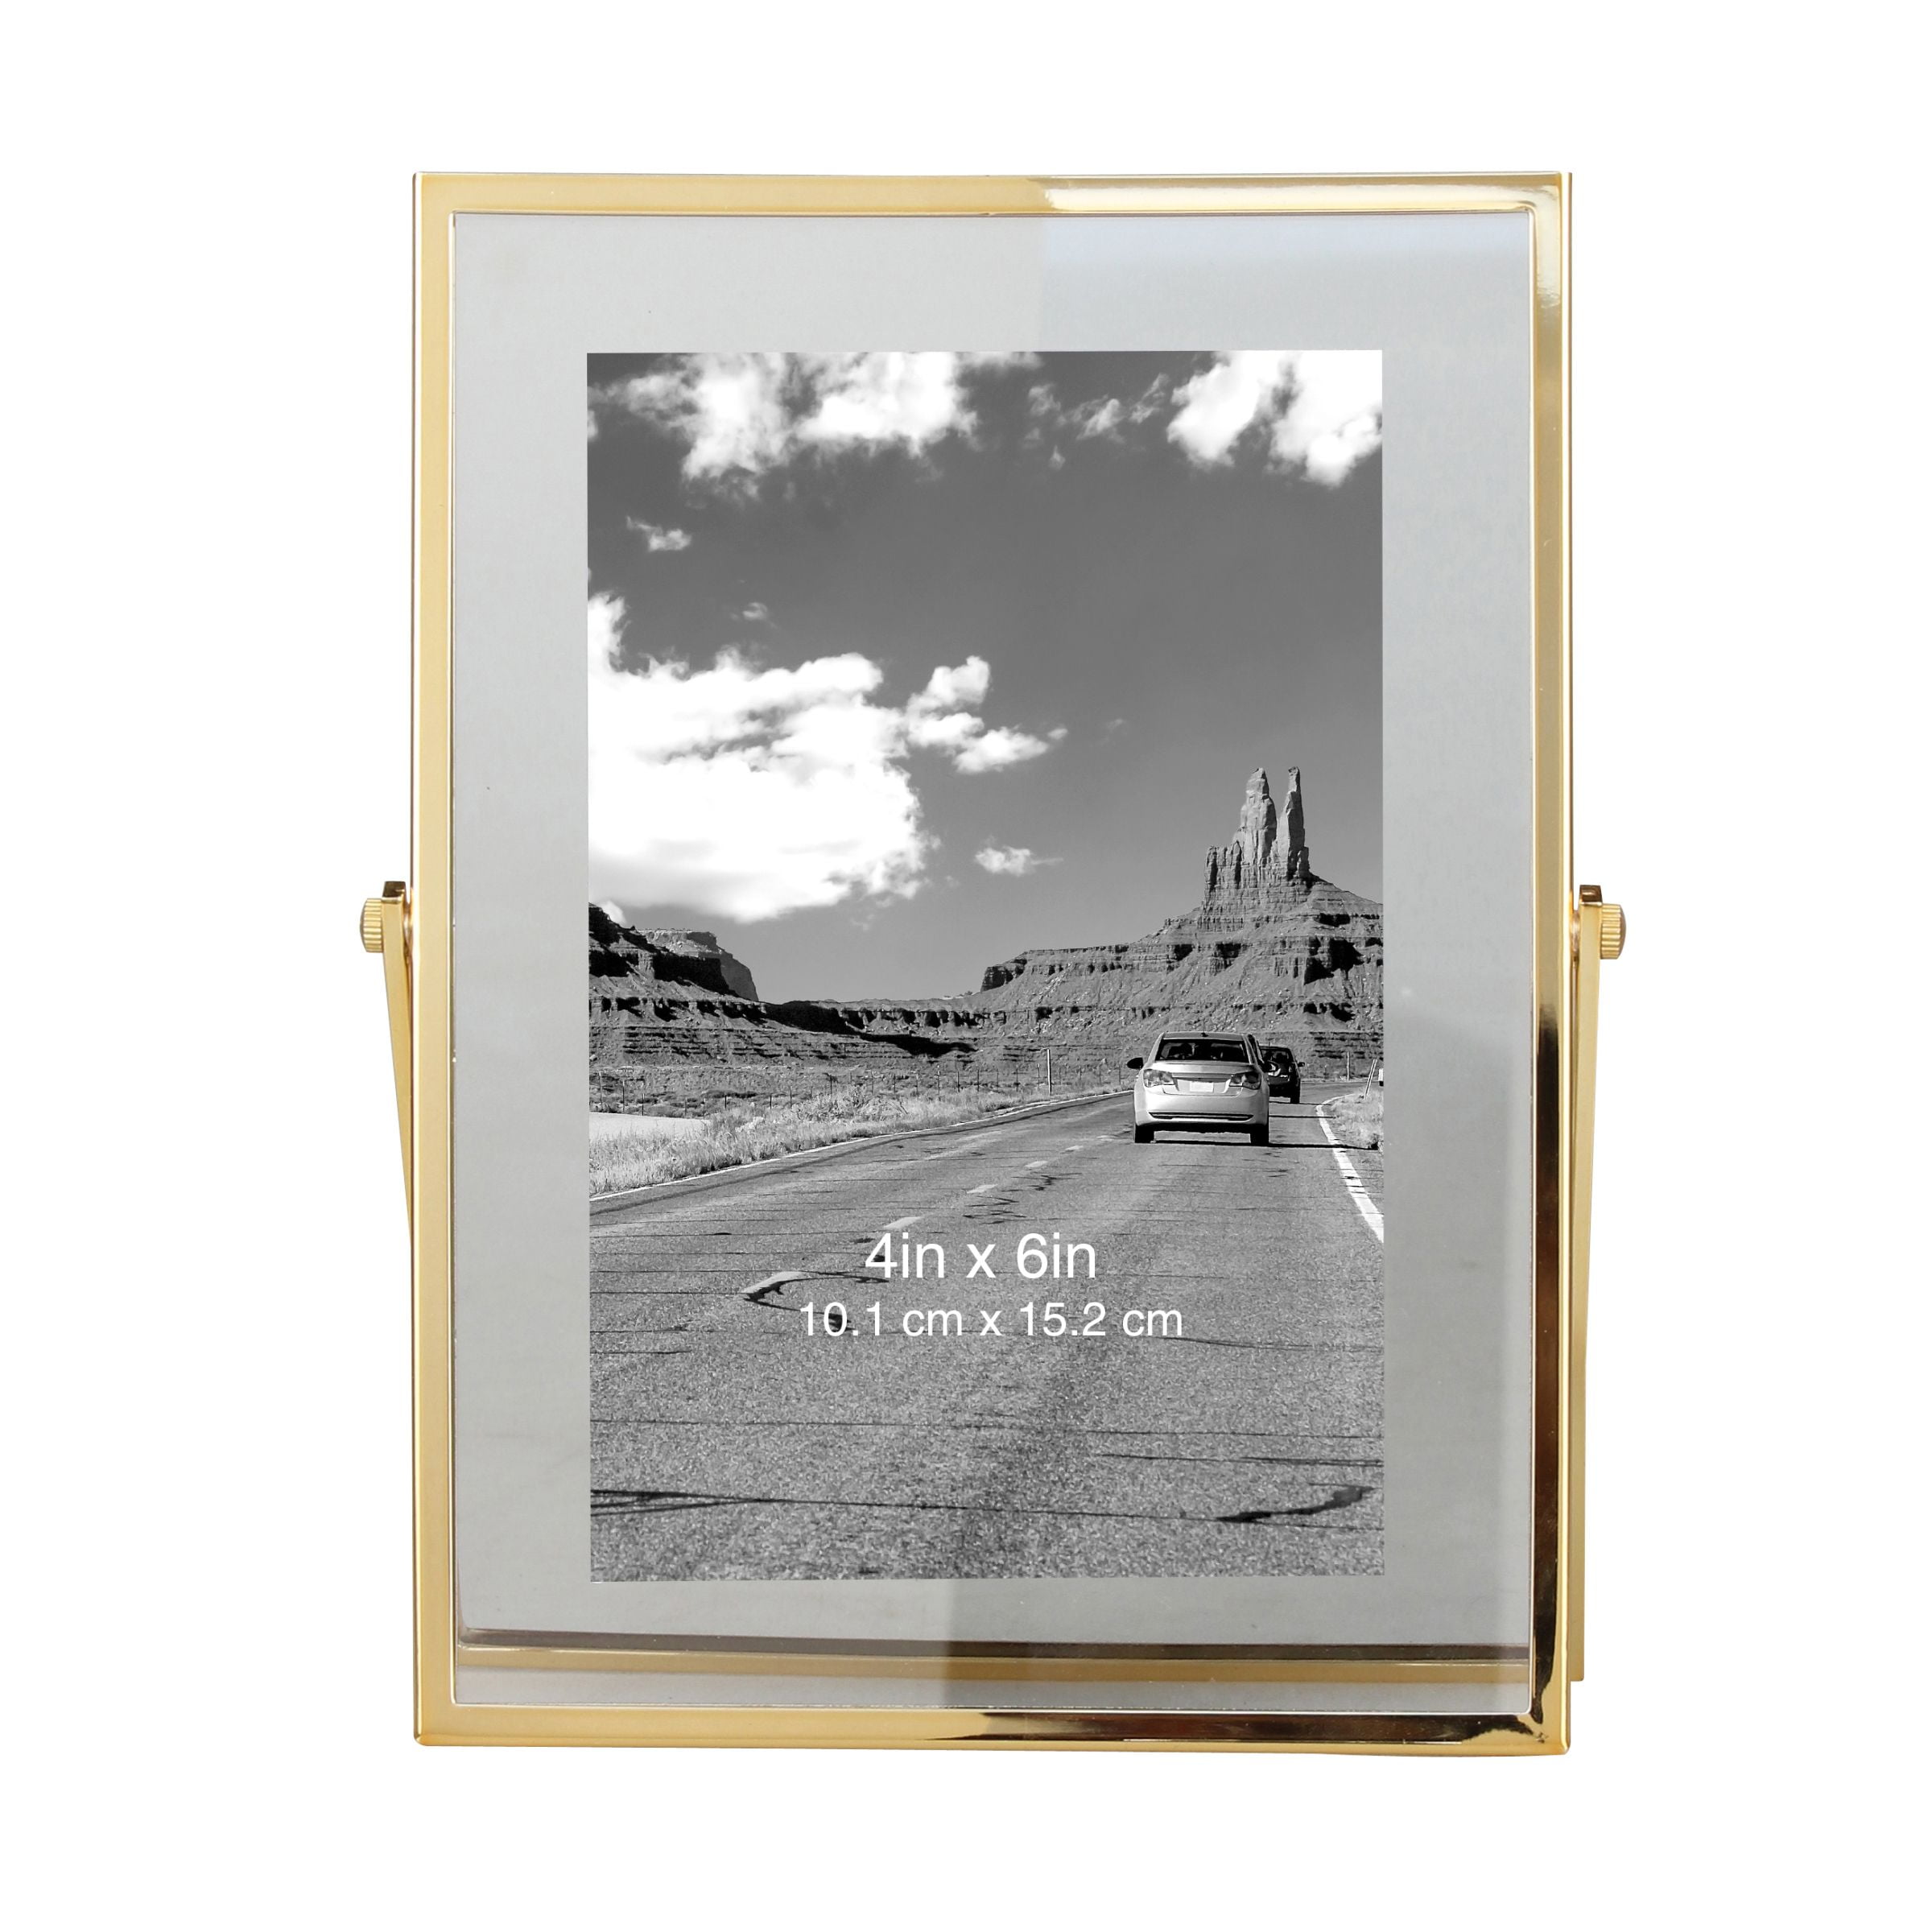 FABULAXE 4 in. x 6 in. Gold Modern Metal Floating Tabletop Photo Picture  Frame with Glass Cover and Free Spinning Stand QI004496.GD.S - The Home  Depot